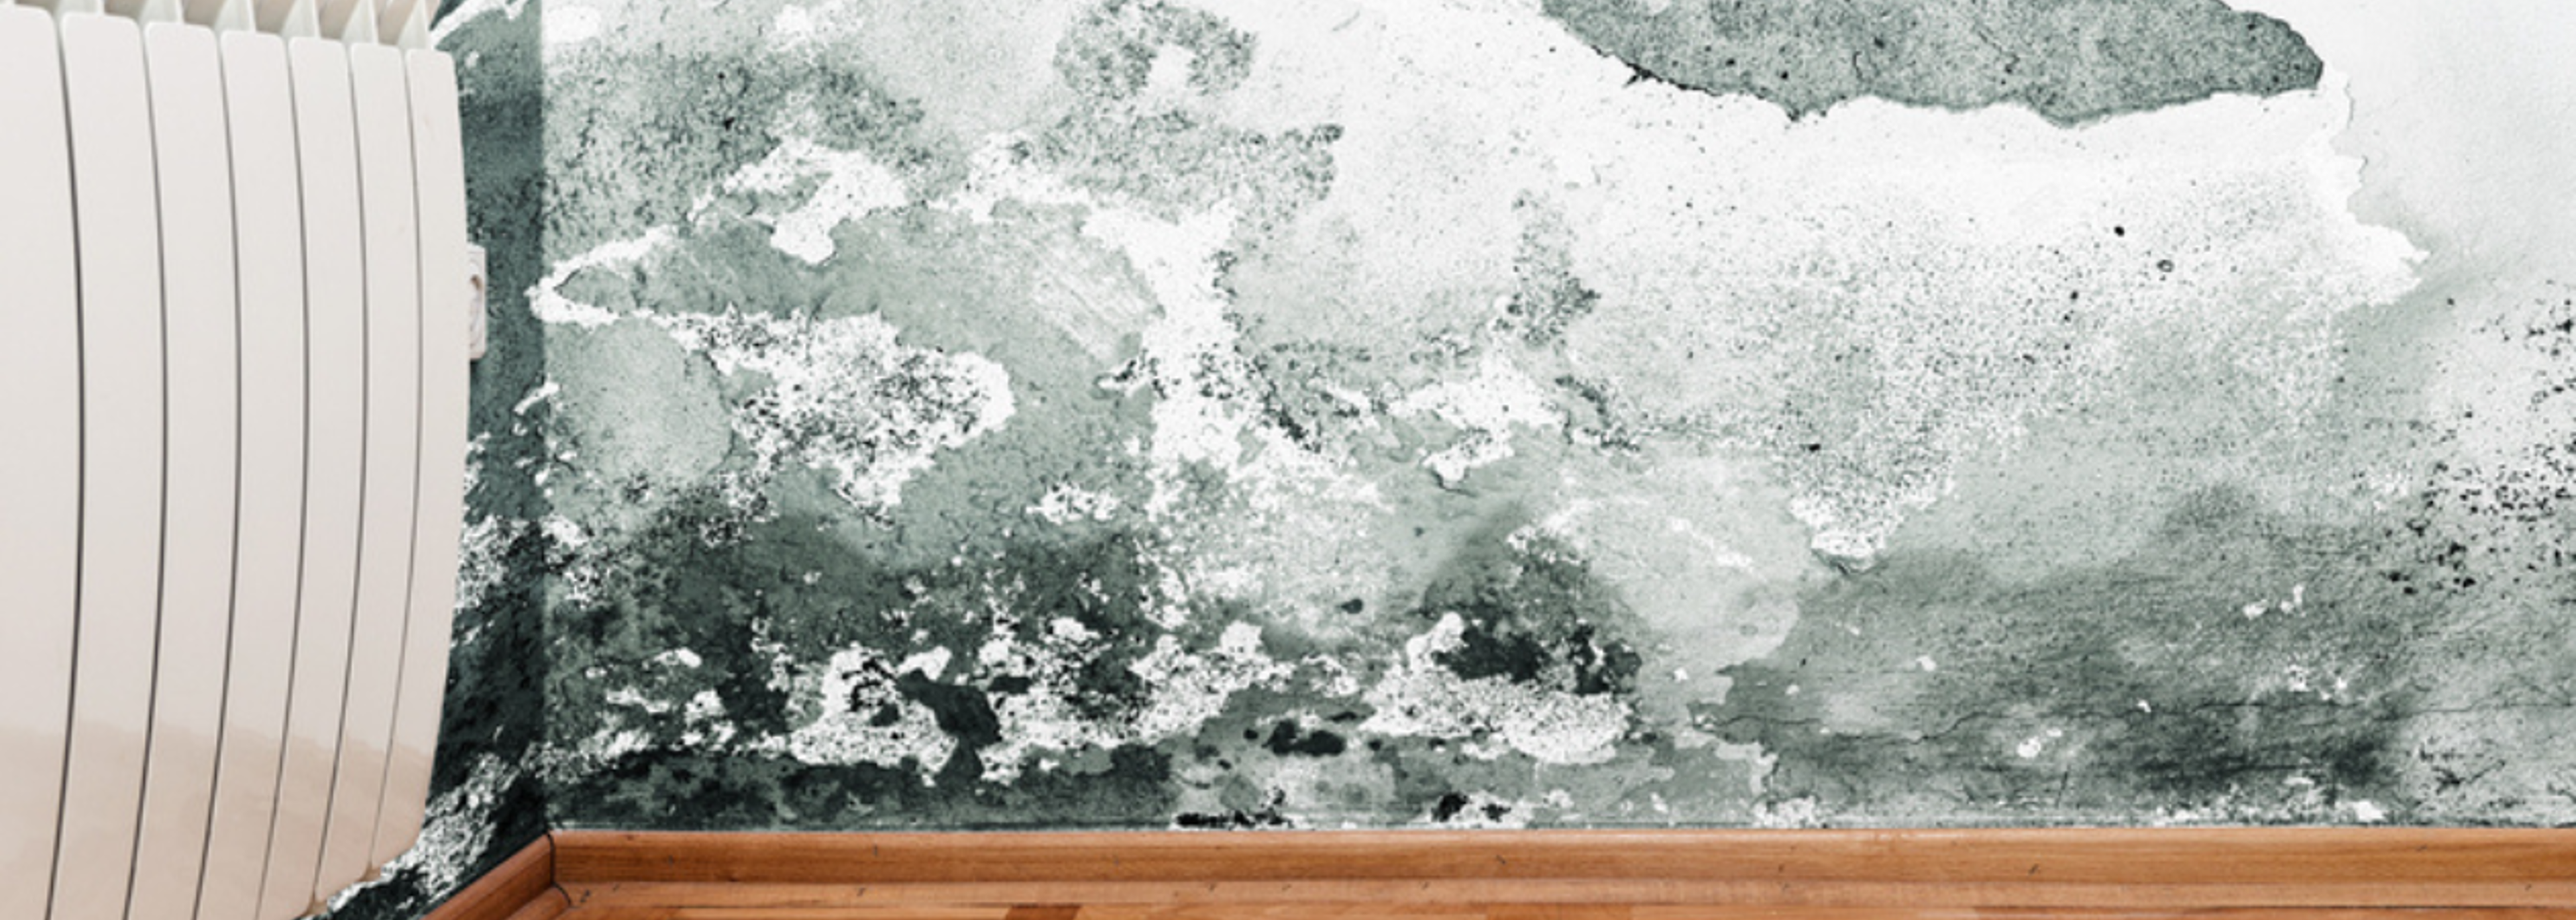 Over 1,100 private rentals have dangerous levels of damp and mould